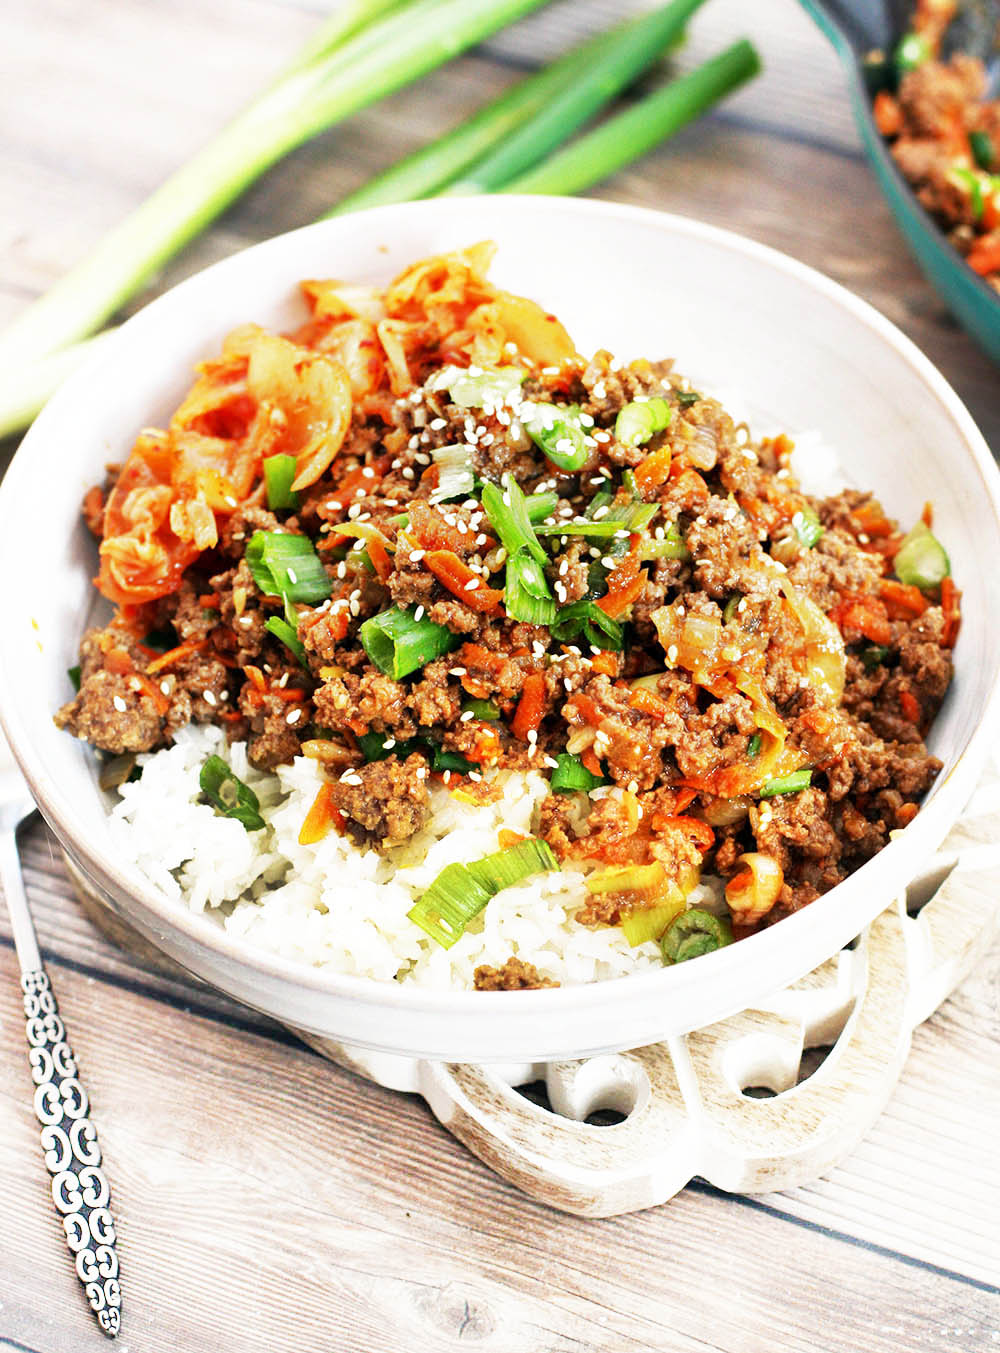 Korean ground beef bowls: Comes together in about 20 minutes. Click through for recipe!